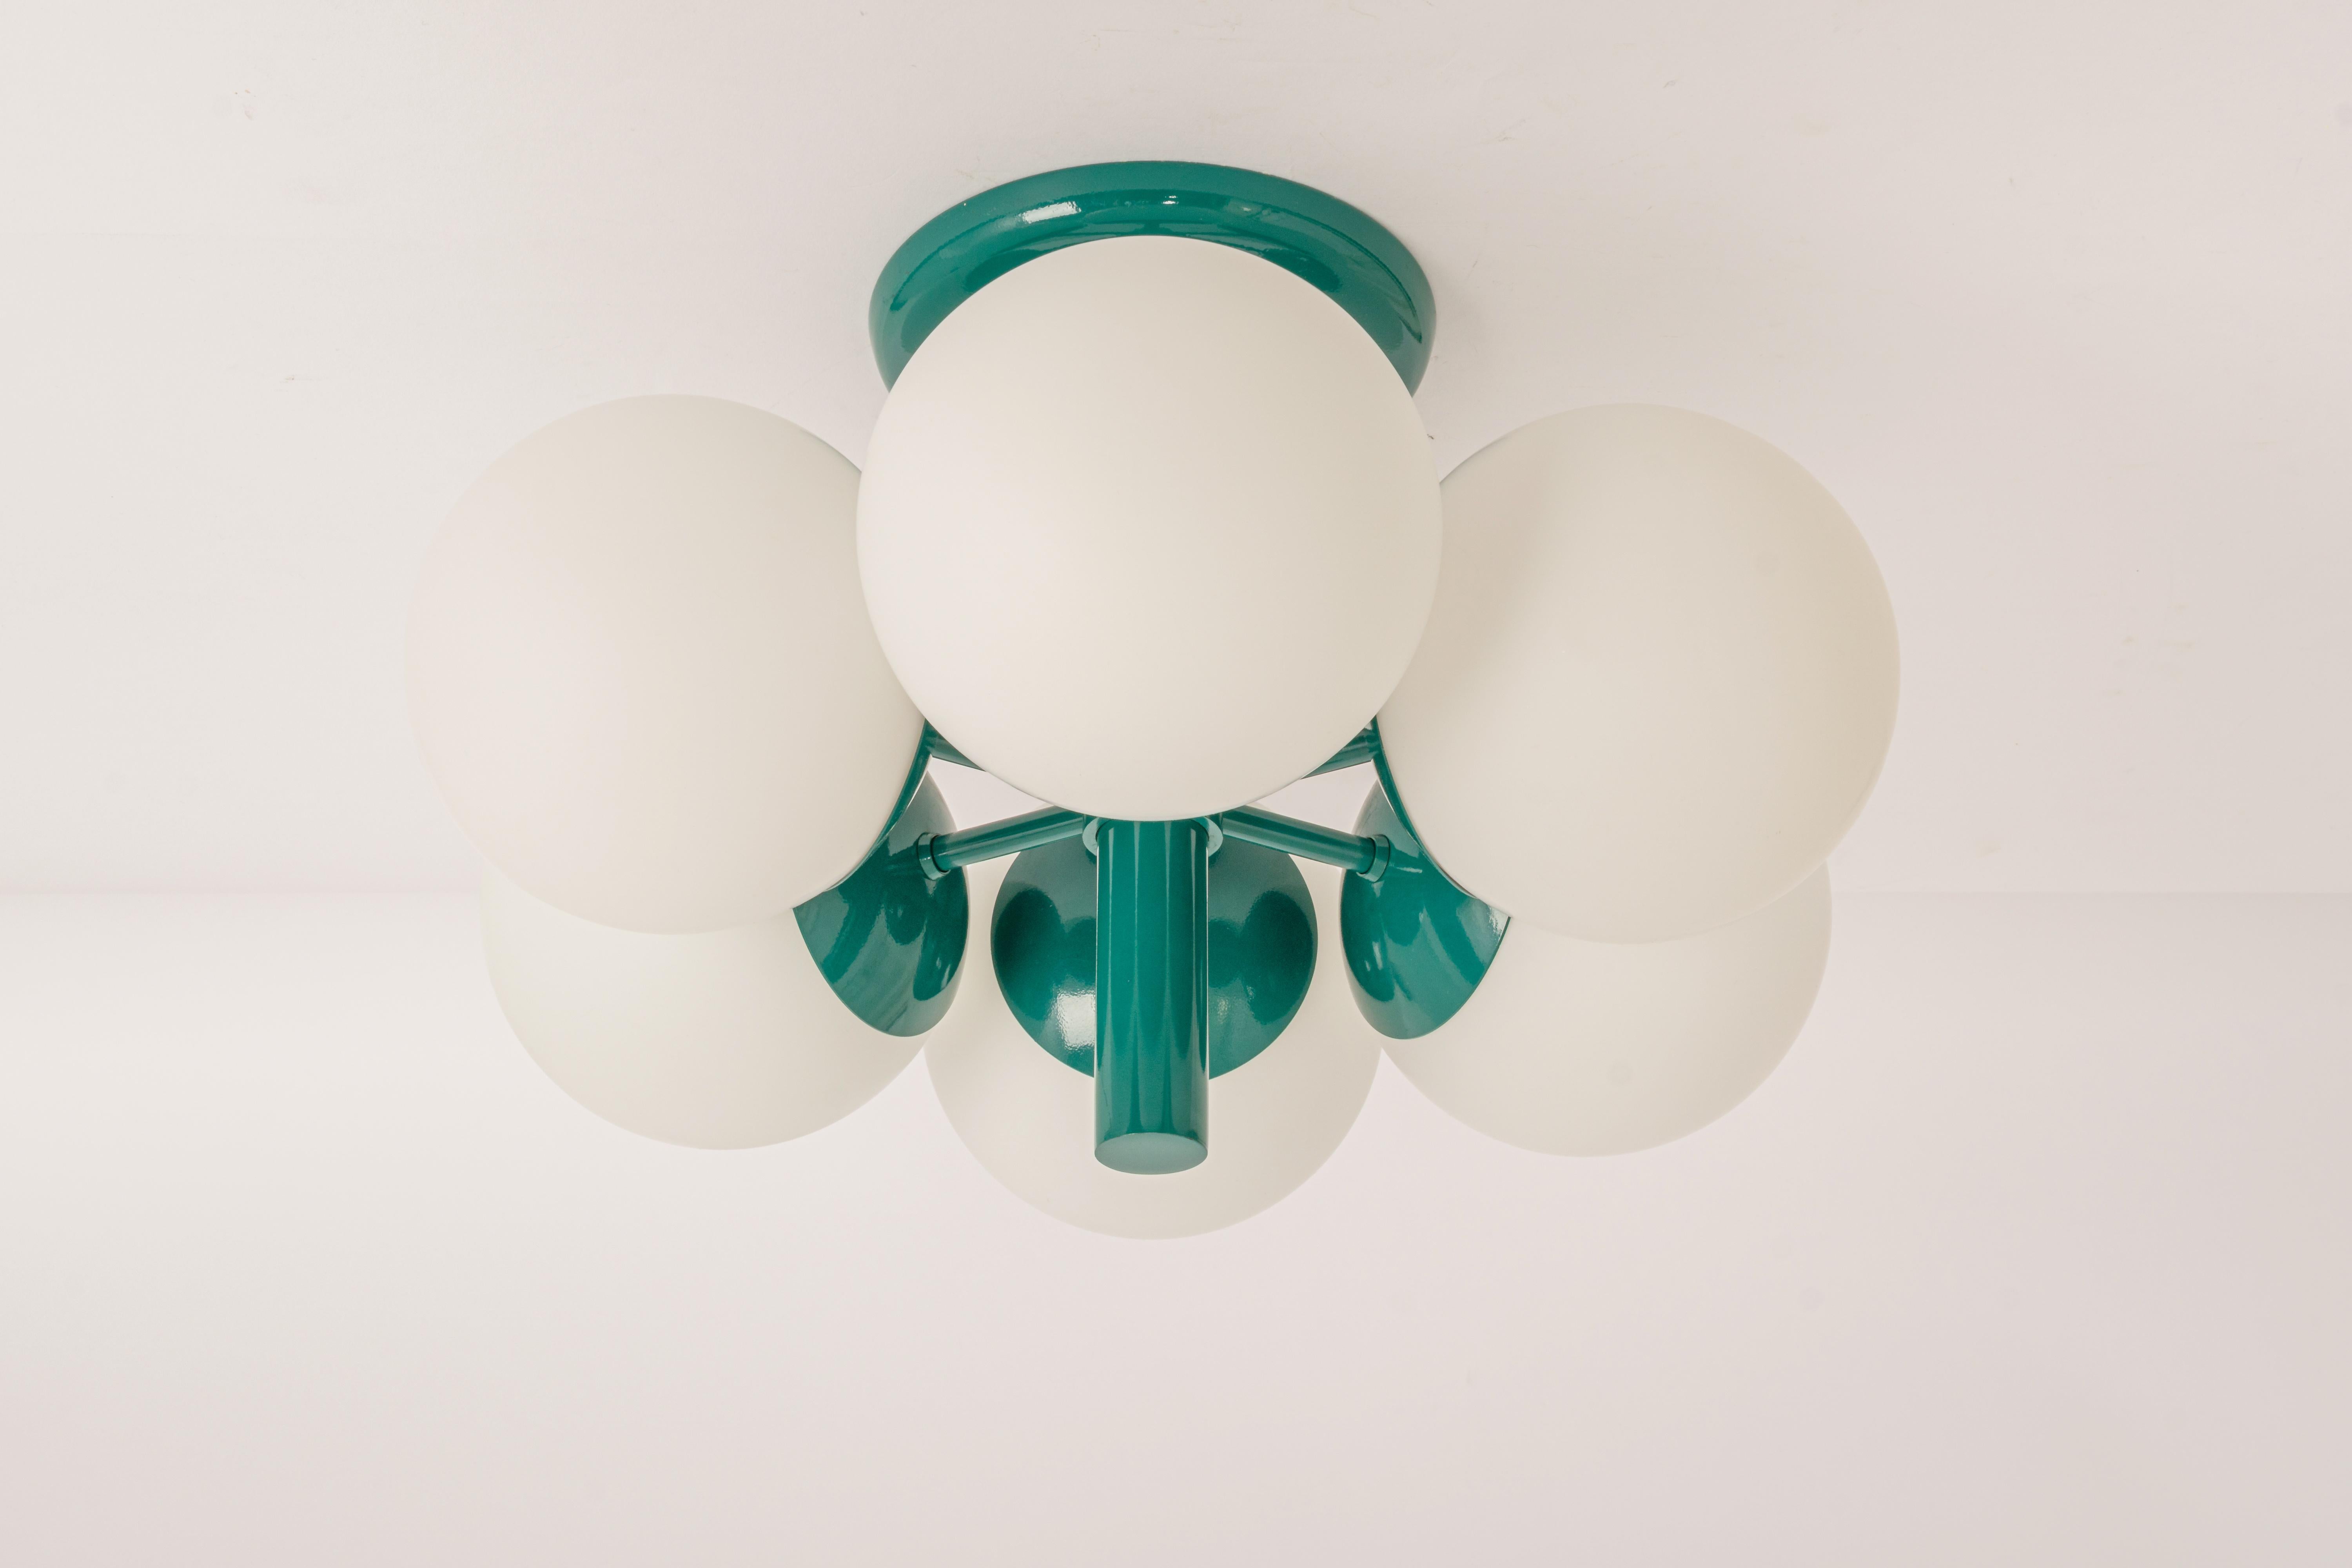 Midcentury Orbital Ceiling /Wall Lamp in Green by Kaiser, Germany, 1970s For Sale 7